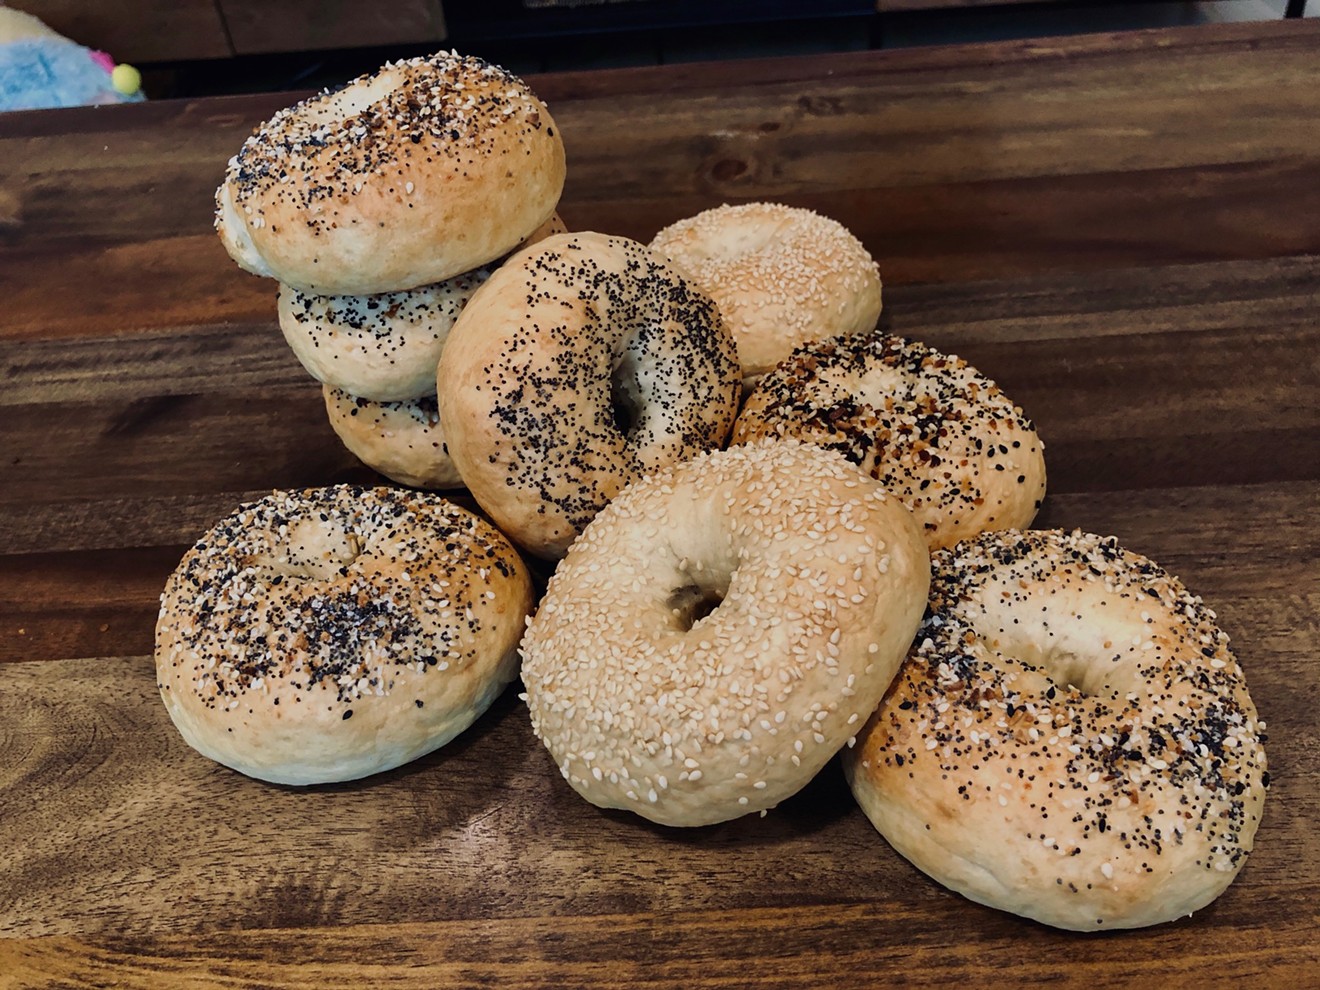 Arielle and Tom Lasorsa started making bagels as a quarantine pastime, but it quickly became something more.